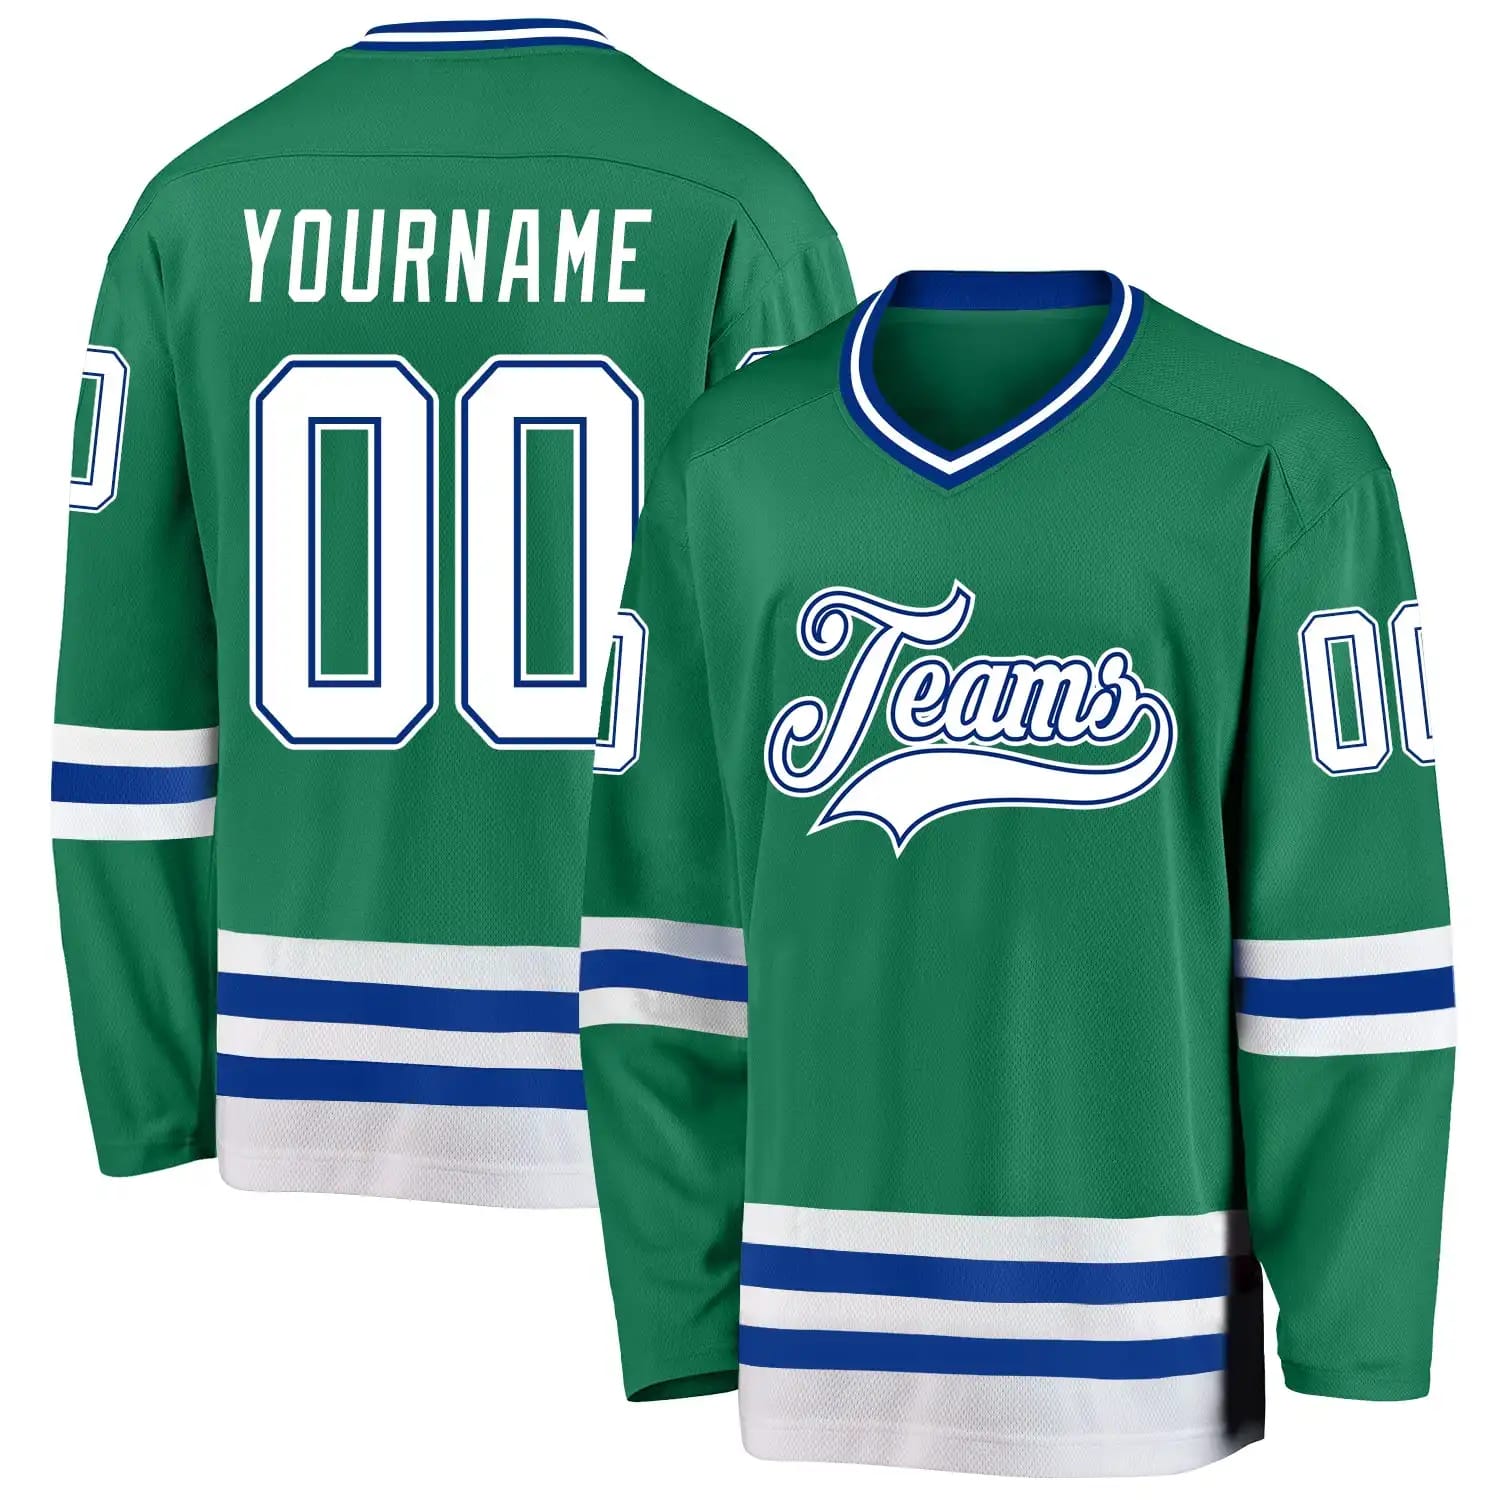 Stitched And Print Kelly Green White-Royal Hockey Jersey Custom